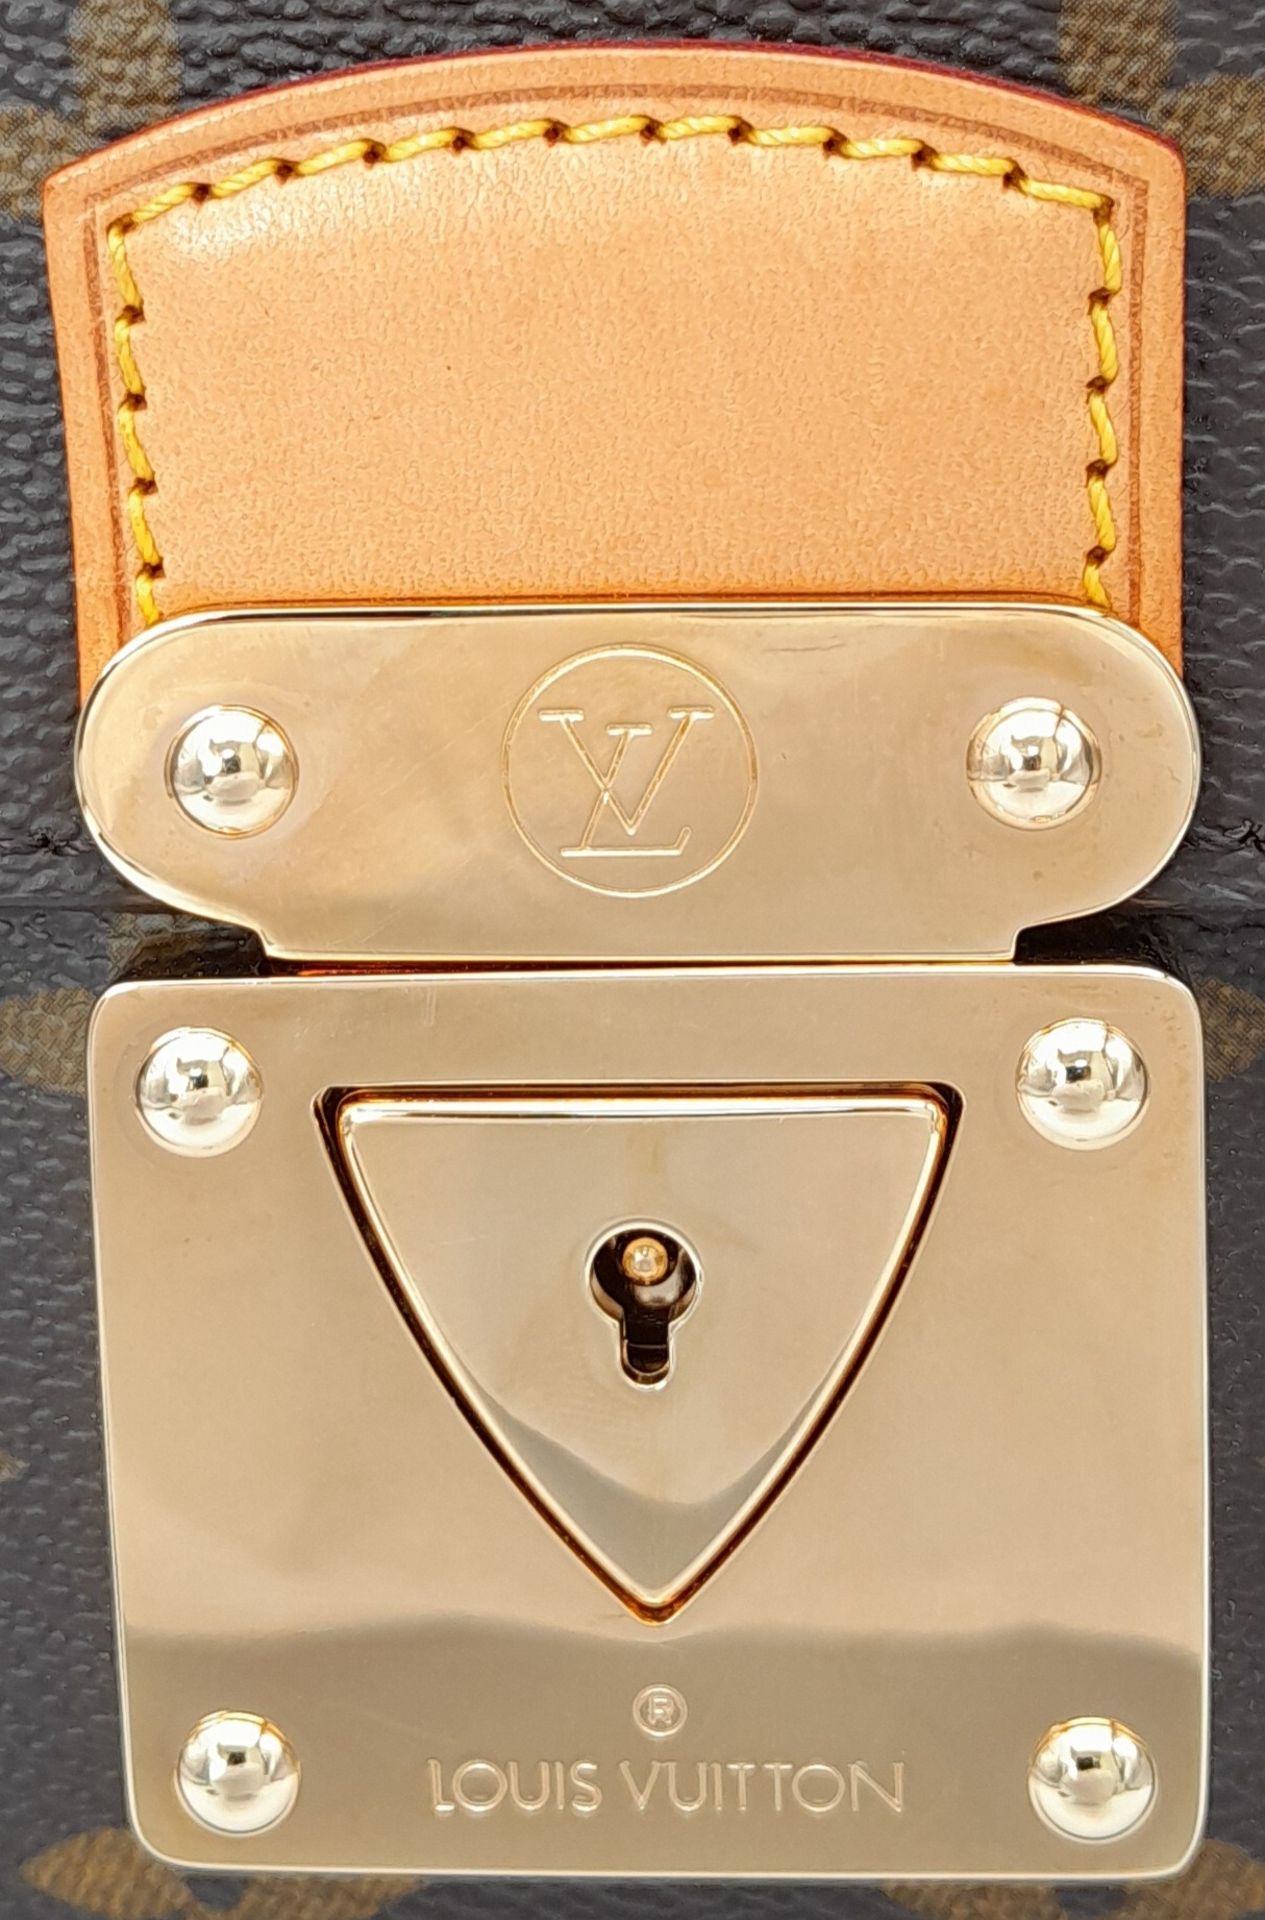 AN IMMACULATE LOUIS VUITTON CLASSIC BRIEF CASE IN UNUSED CONDITION WITH ORIGINAL DUST COVER . 38 X - Bild 3 aus 10